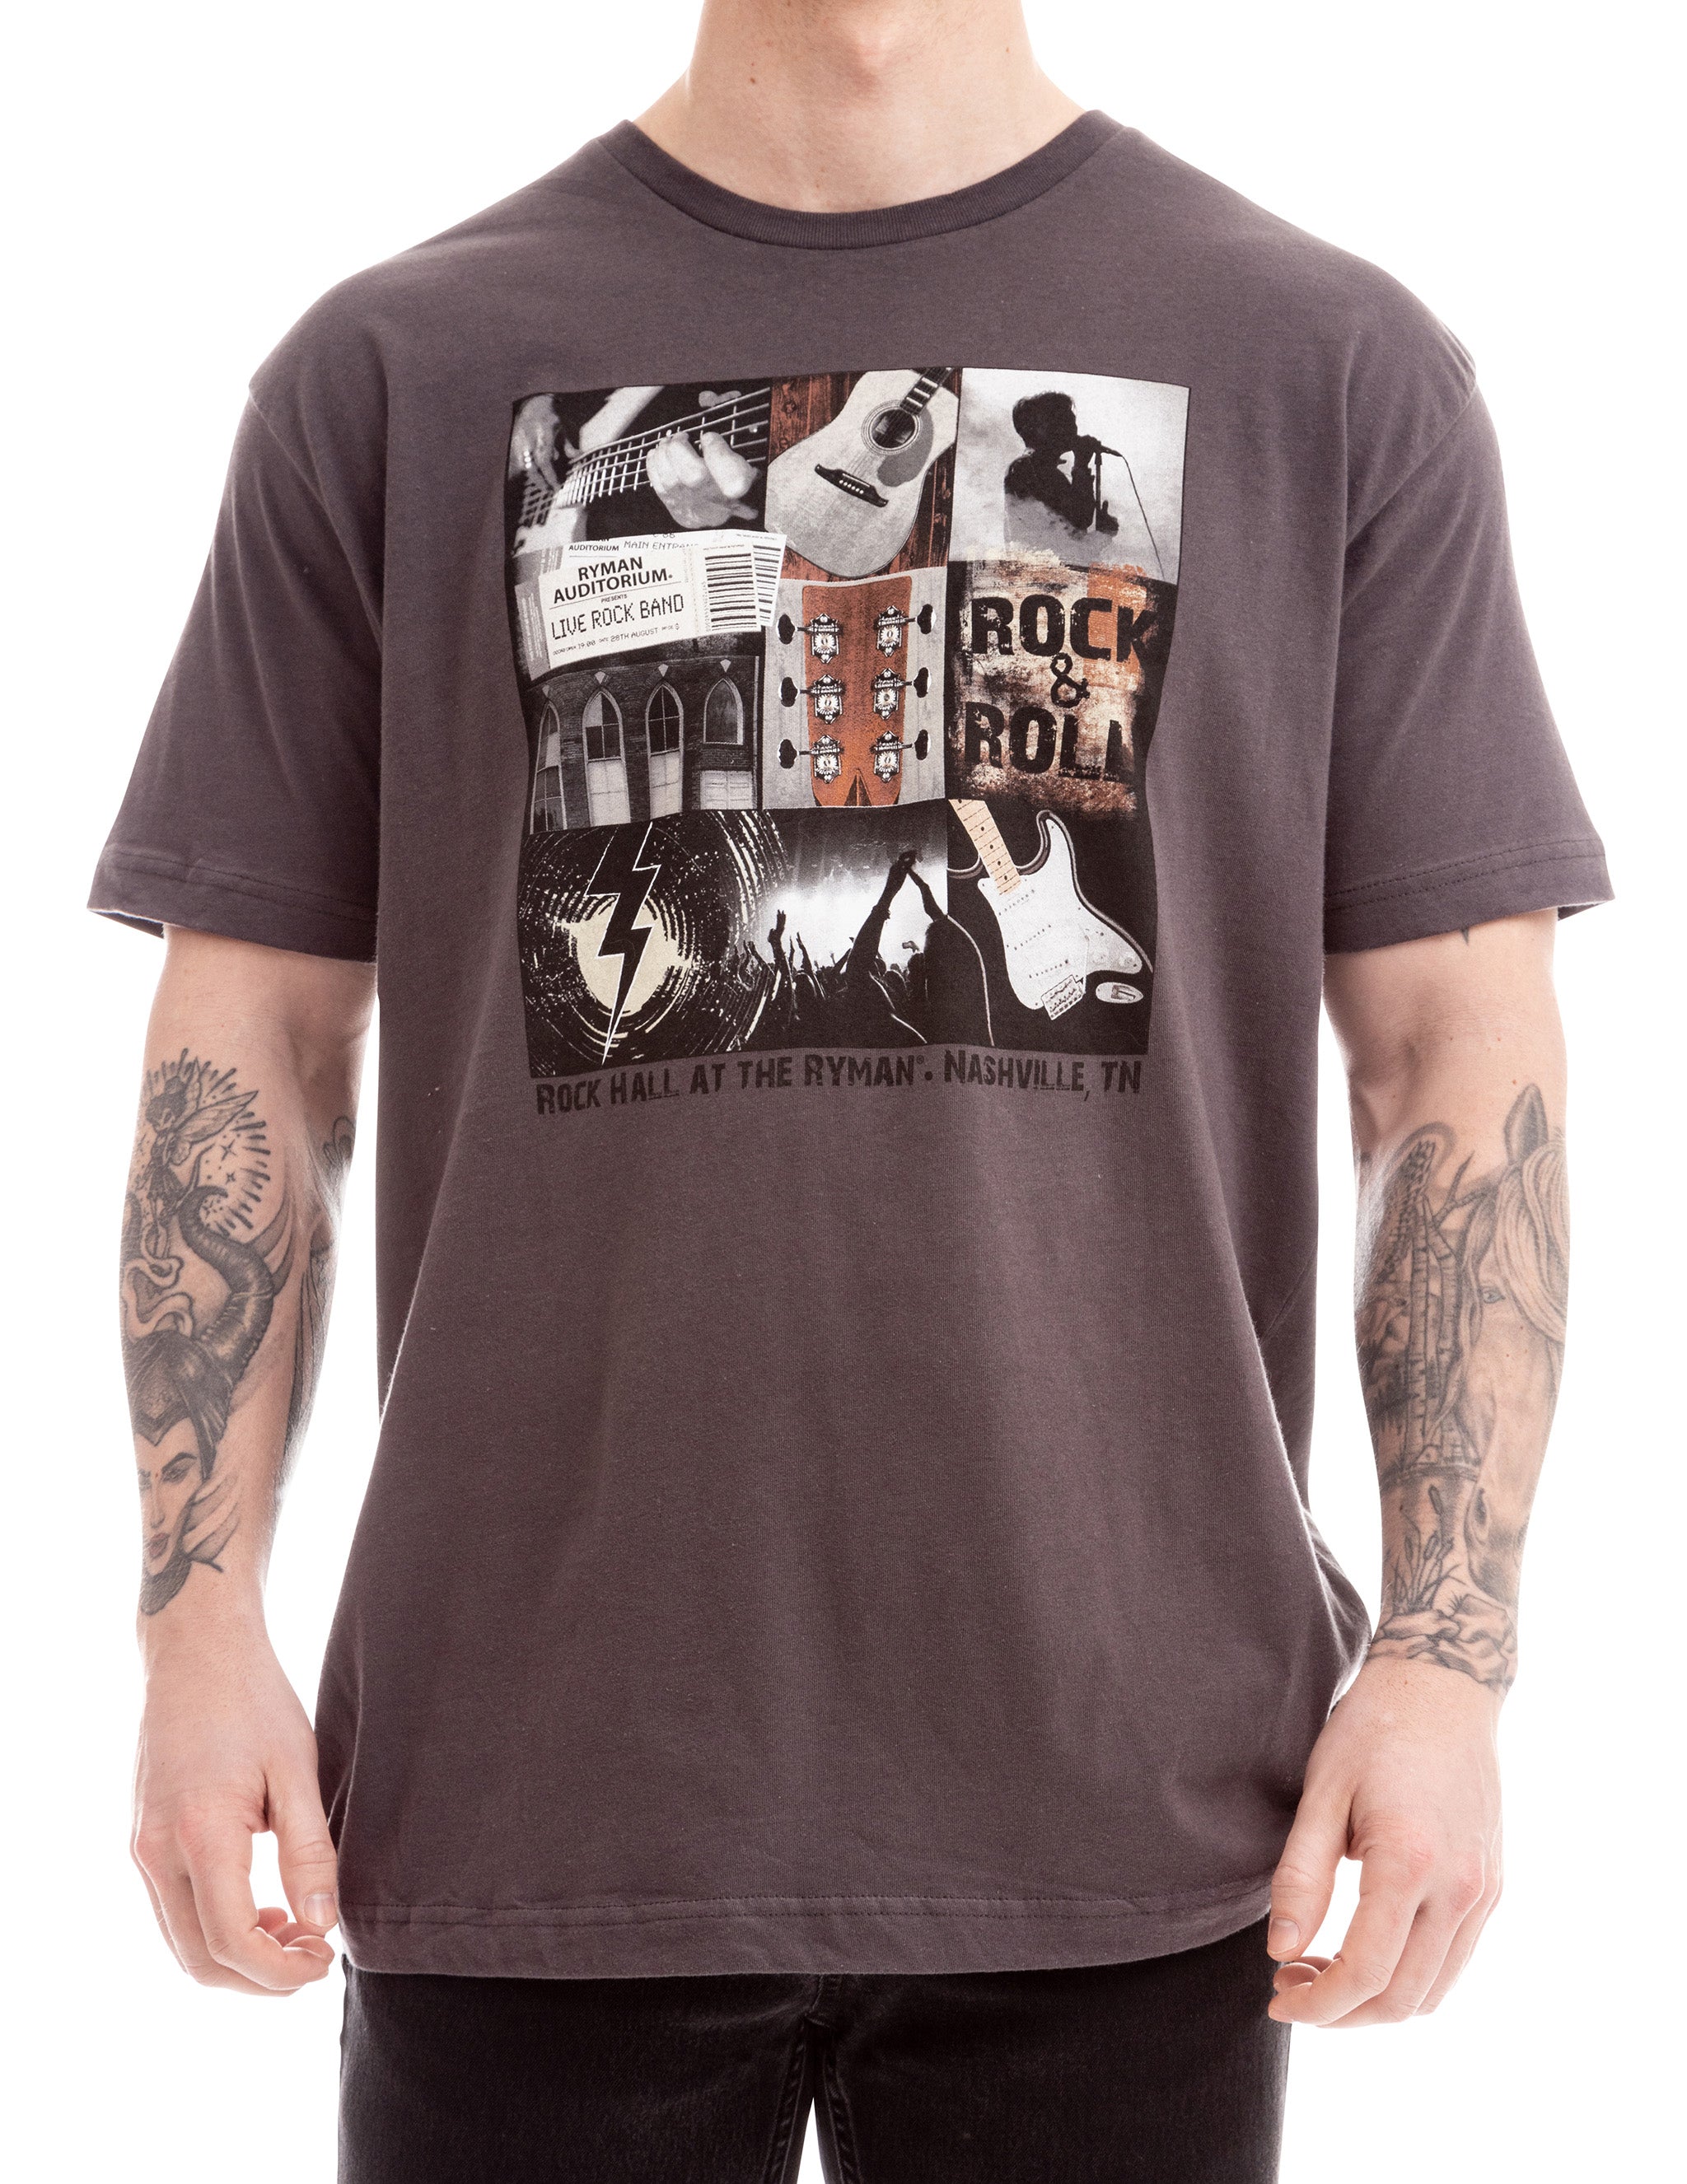 Rock Hall at the Ryman Concert Collage T-Shirt